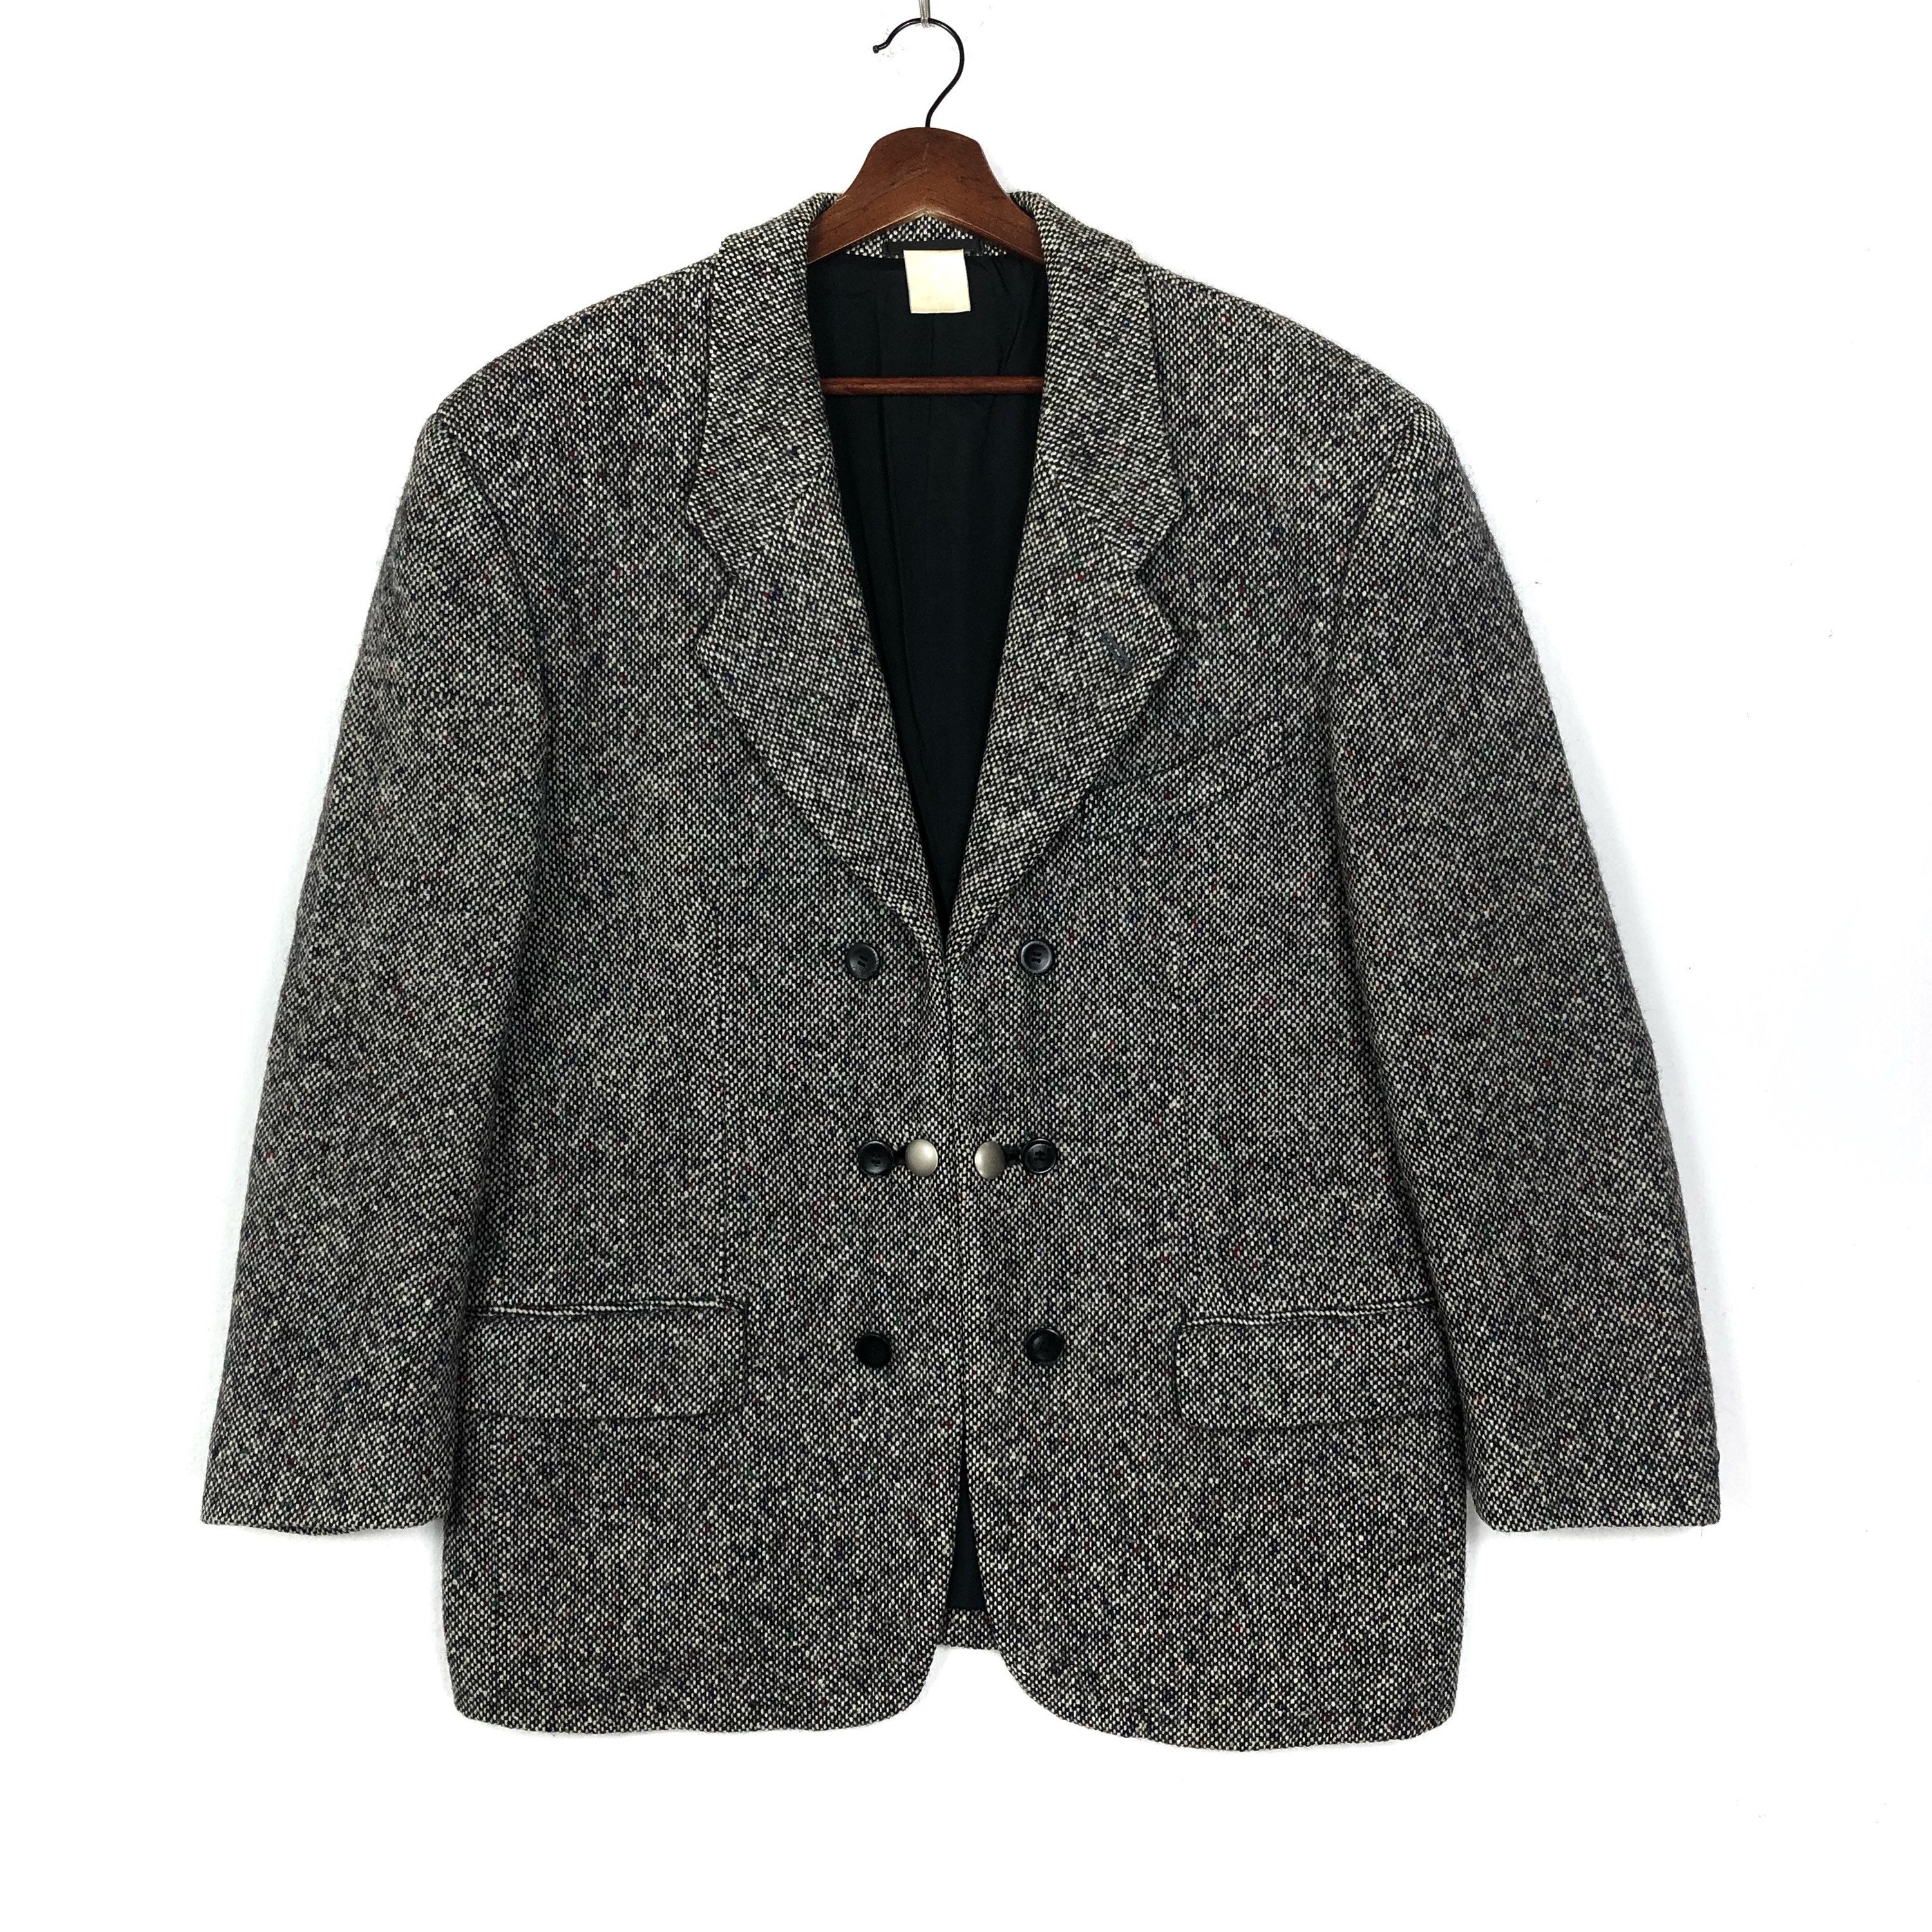 Vintage AW1988 Comme Des Garcons Homme Plus Tweed Jacket by Rei